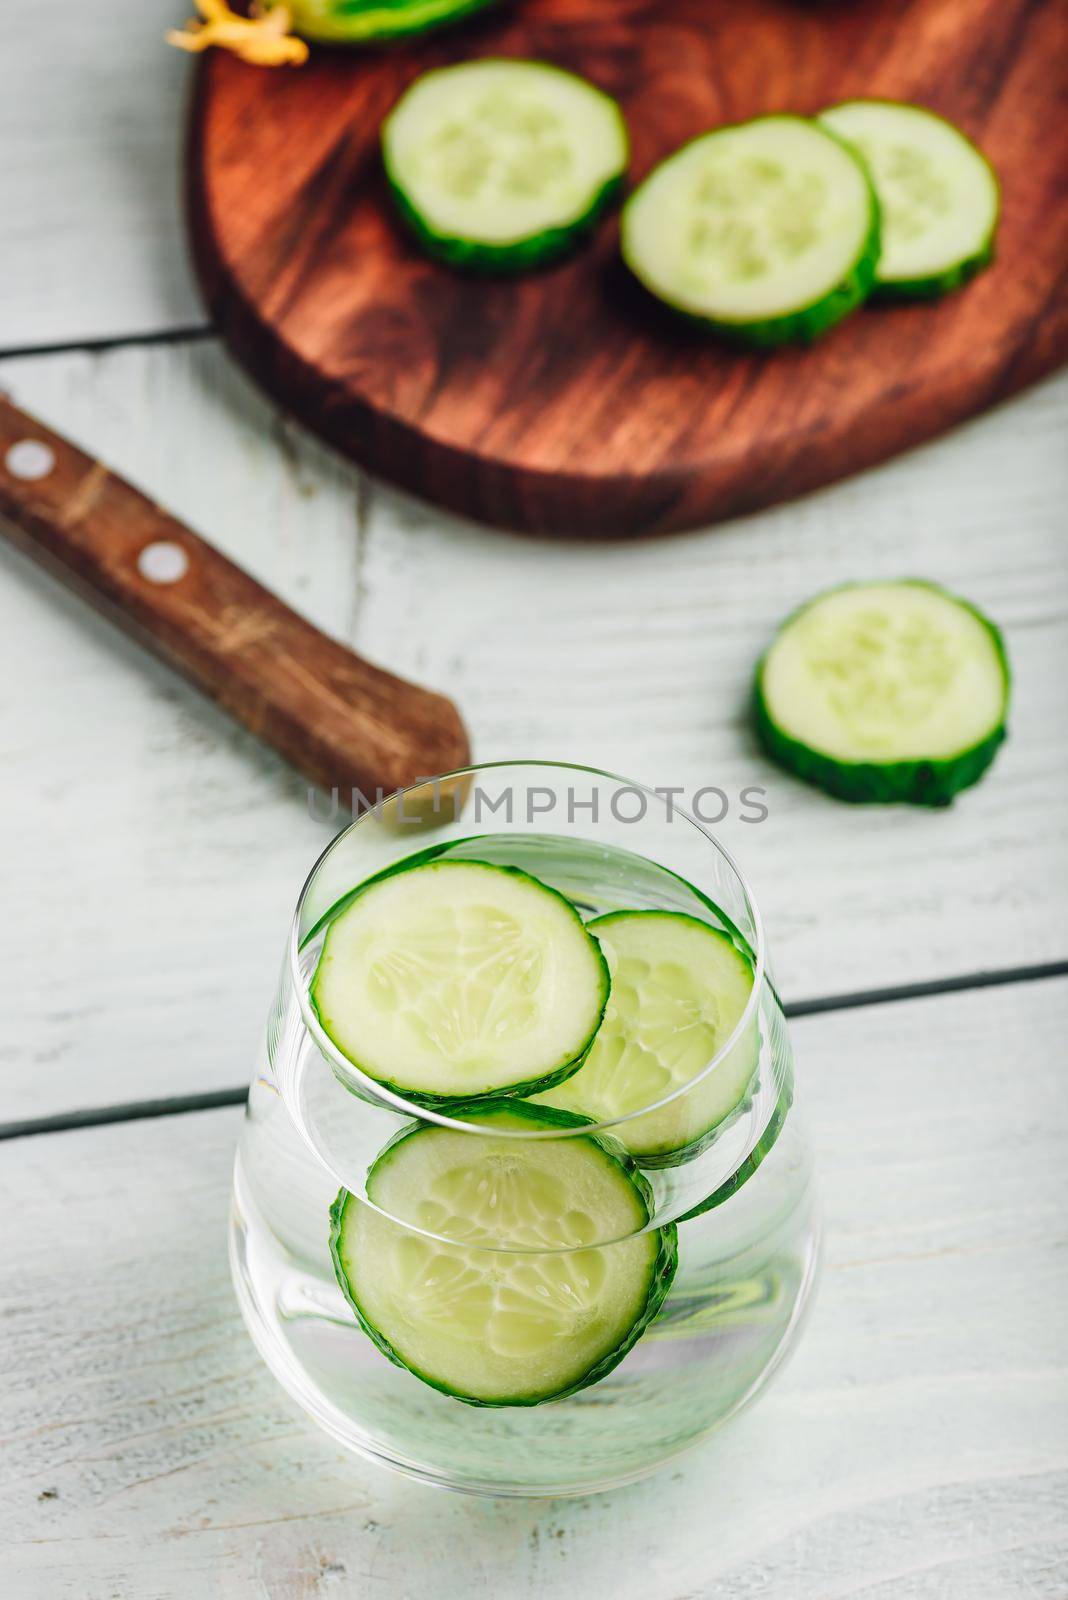 Water infused with sliced cucumber in a drinking glass